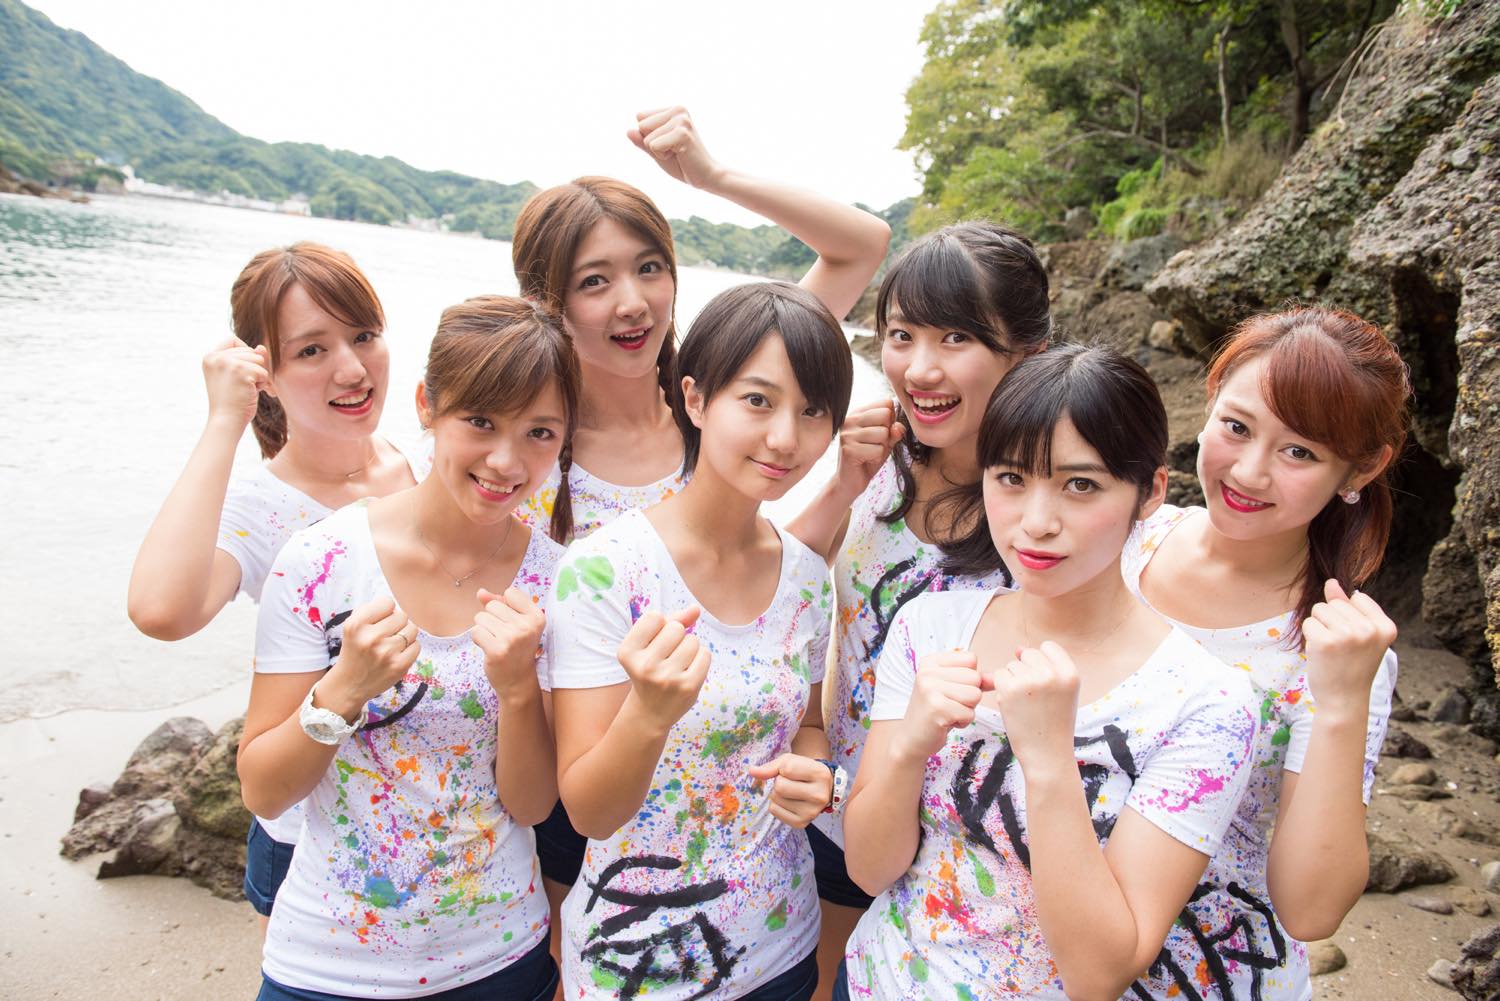 Survival Girls! UPUPGIRLS (KARI) Hold a Live in the Wilderness of Japan!